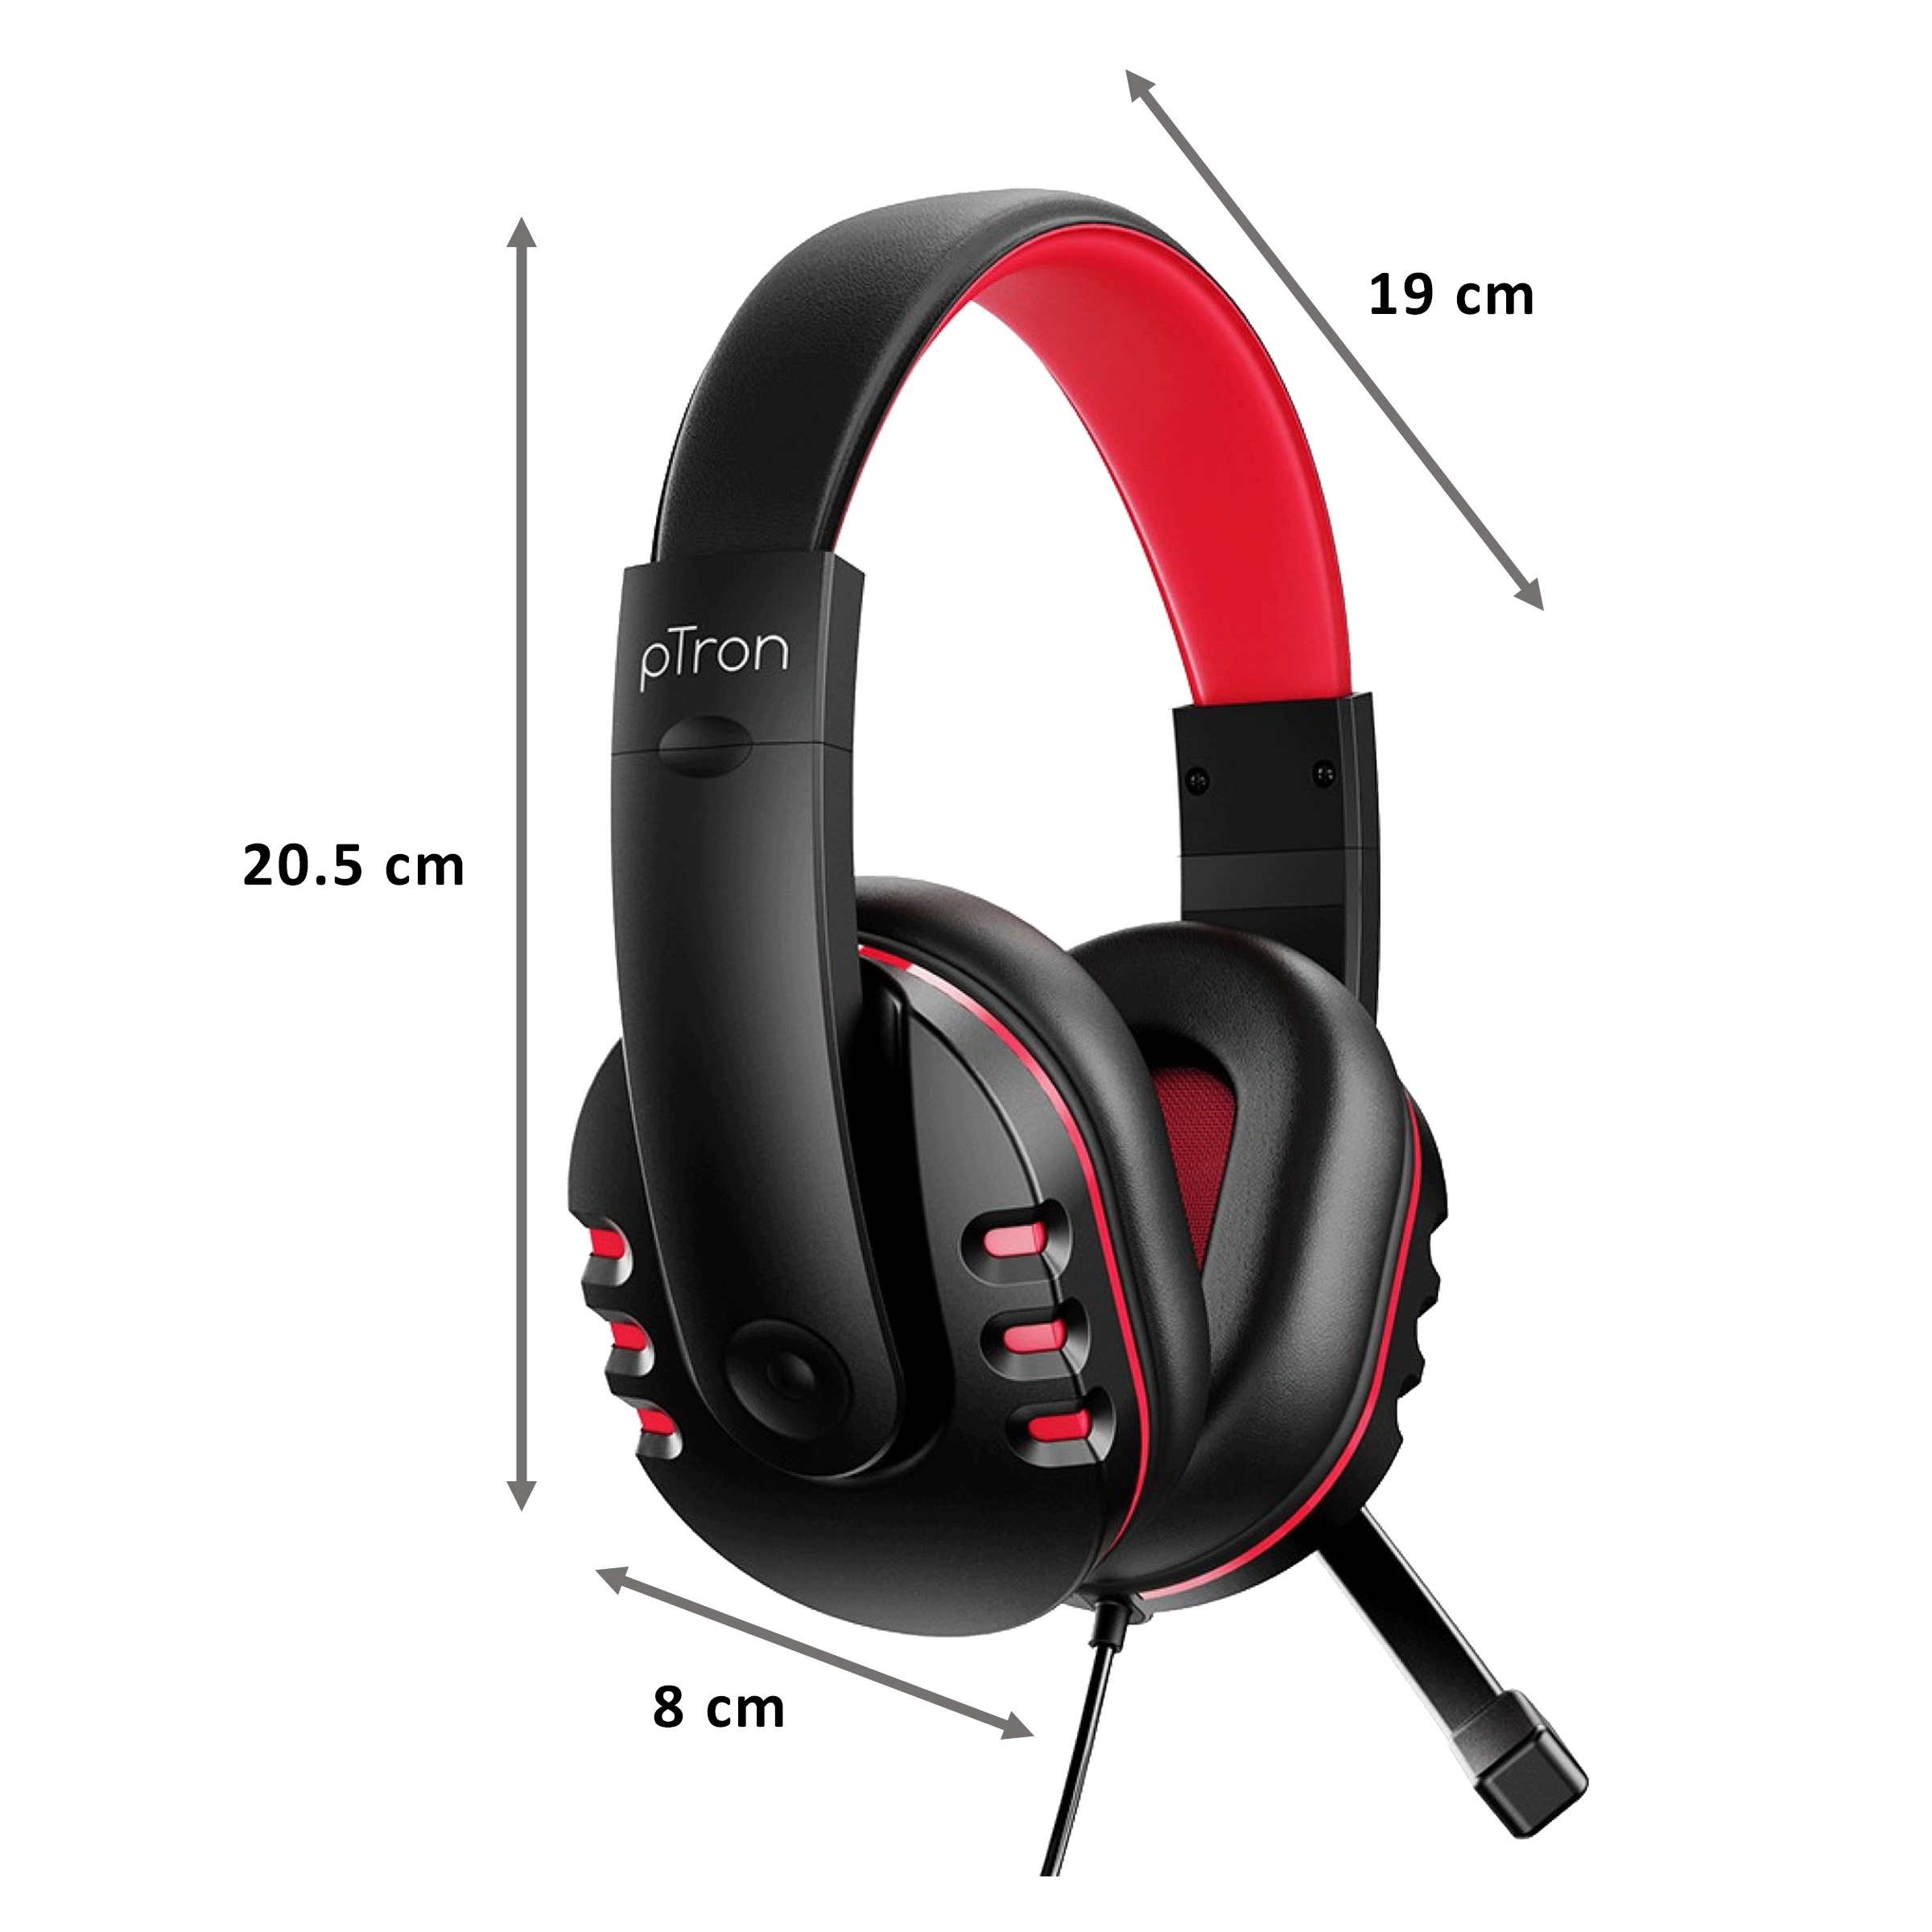 pTron Soundster Arcade 140317989 Over-Ear Wired Gaming Headphone with Mic (40mm Dynamic Driver, Black/Red)_2